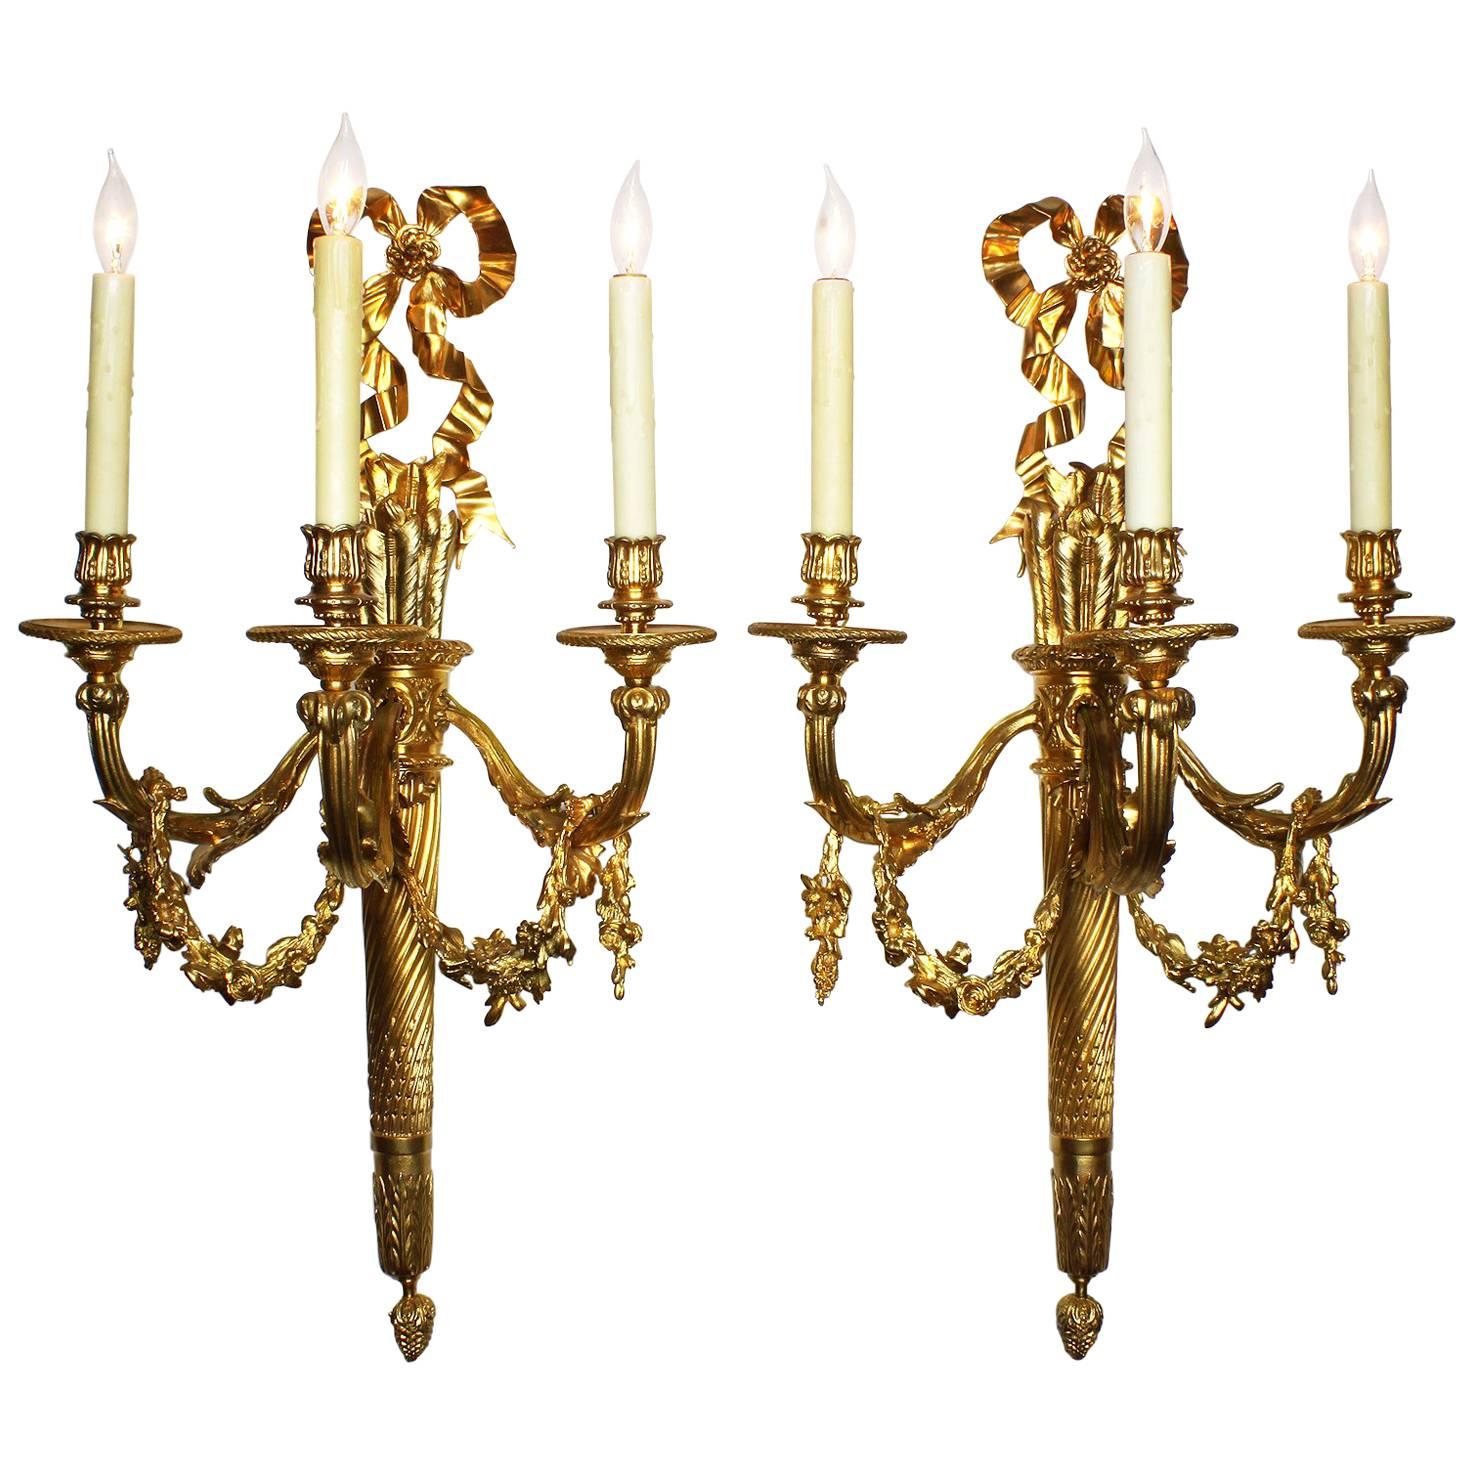 Pair of French 19th-20th Century Louis XVI Style Gilt-Bronze Torch Wall Sconces